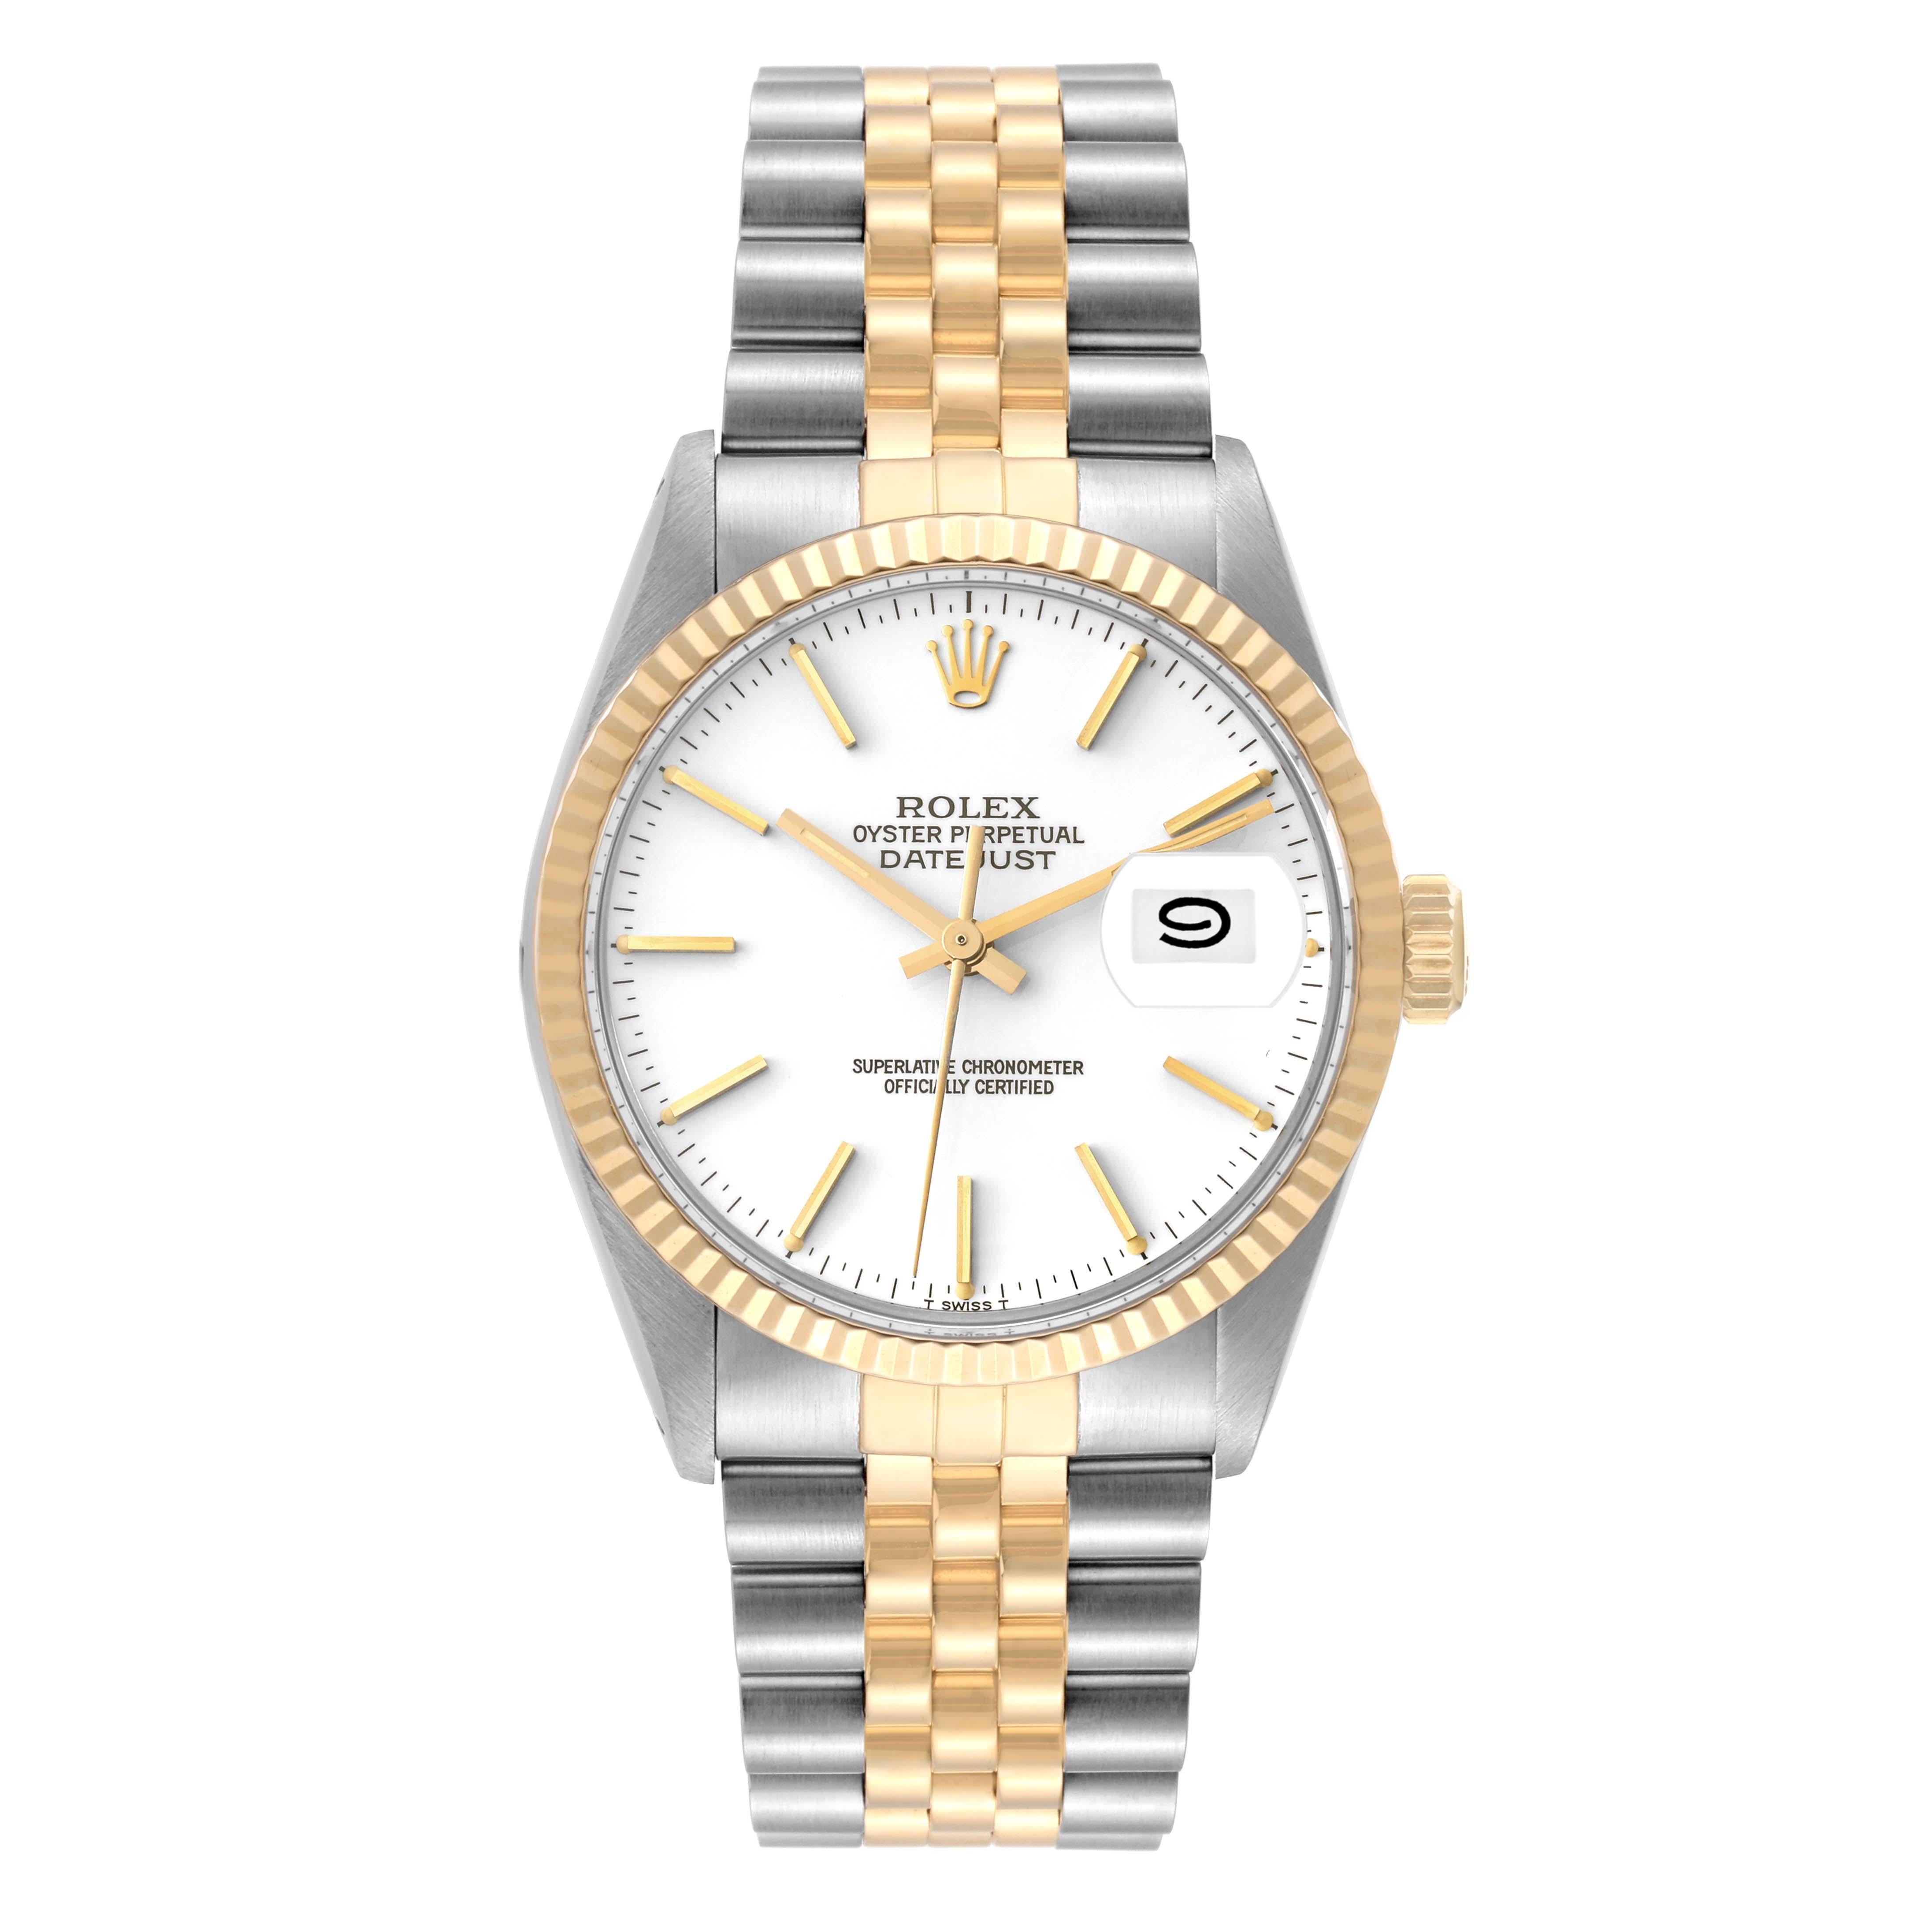 Rolex Datejust Steel Yellow Gold Vintage Mens Watch 16013. Officially certified chronometer automatic self-winding movement. Stainless steel and 18K yellow gold oyster case 36.0 mm in diameter. Rolex logo on an 18k yellow gold crown. 18k yellow gold